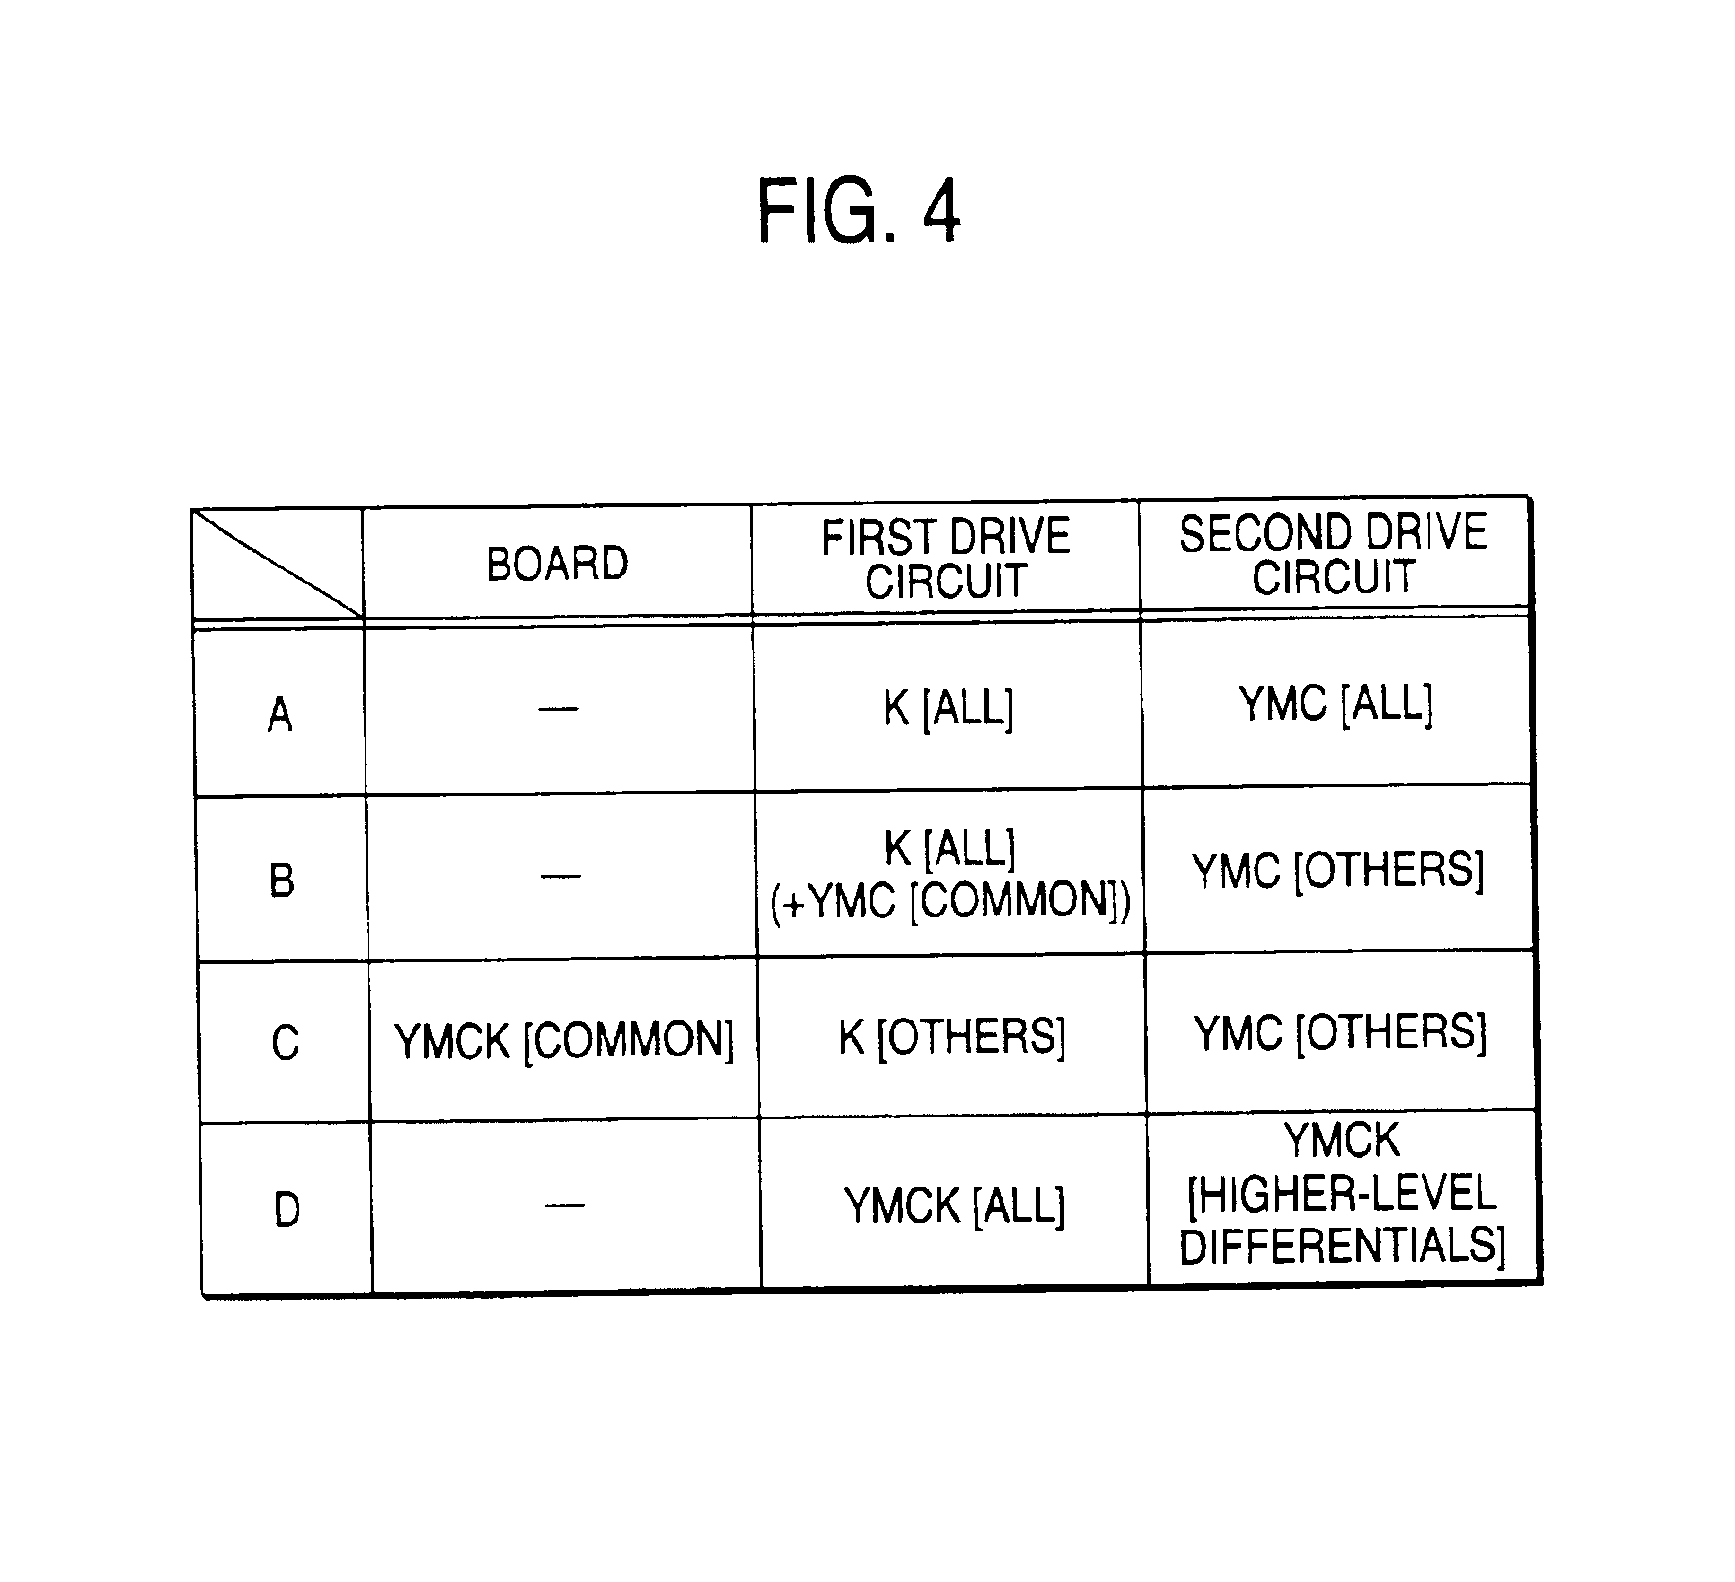 Image forming apparatus and control board thereof, method for recycling the image forming apparatus, and method for recycling the control board